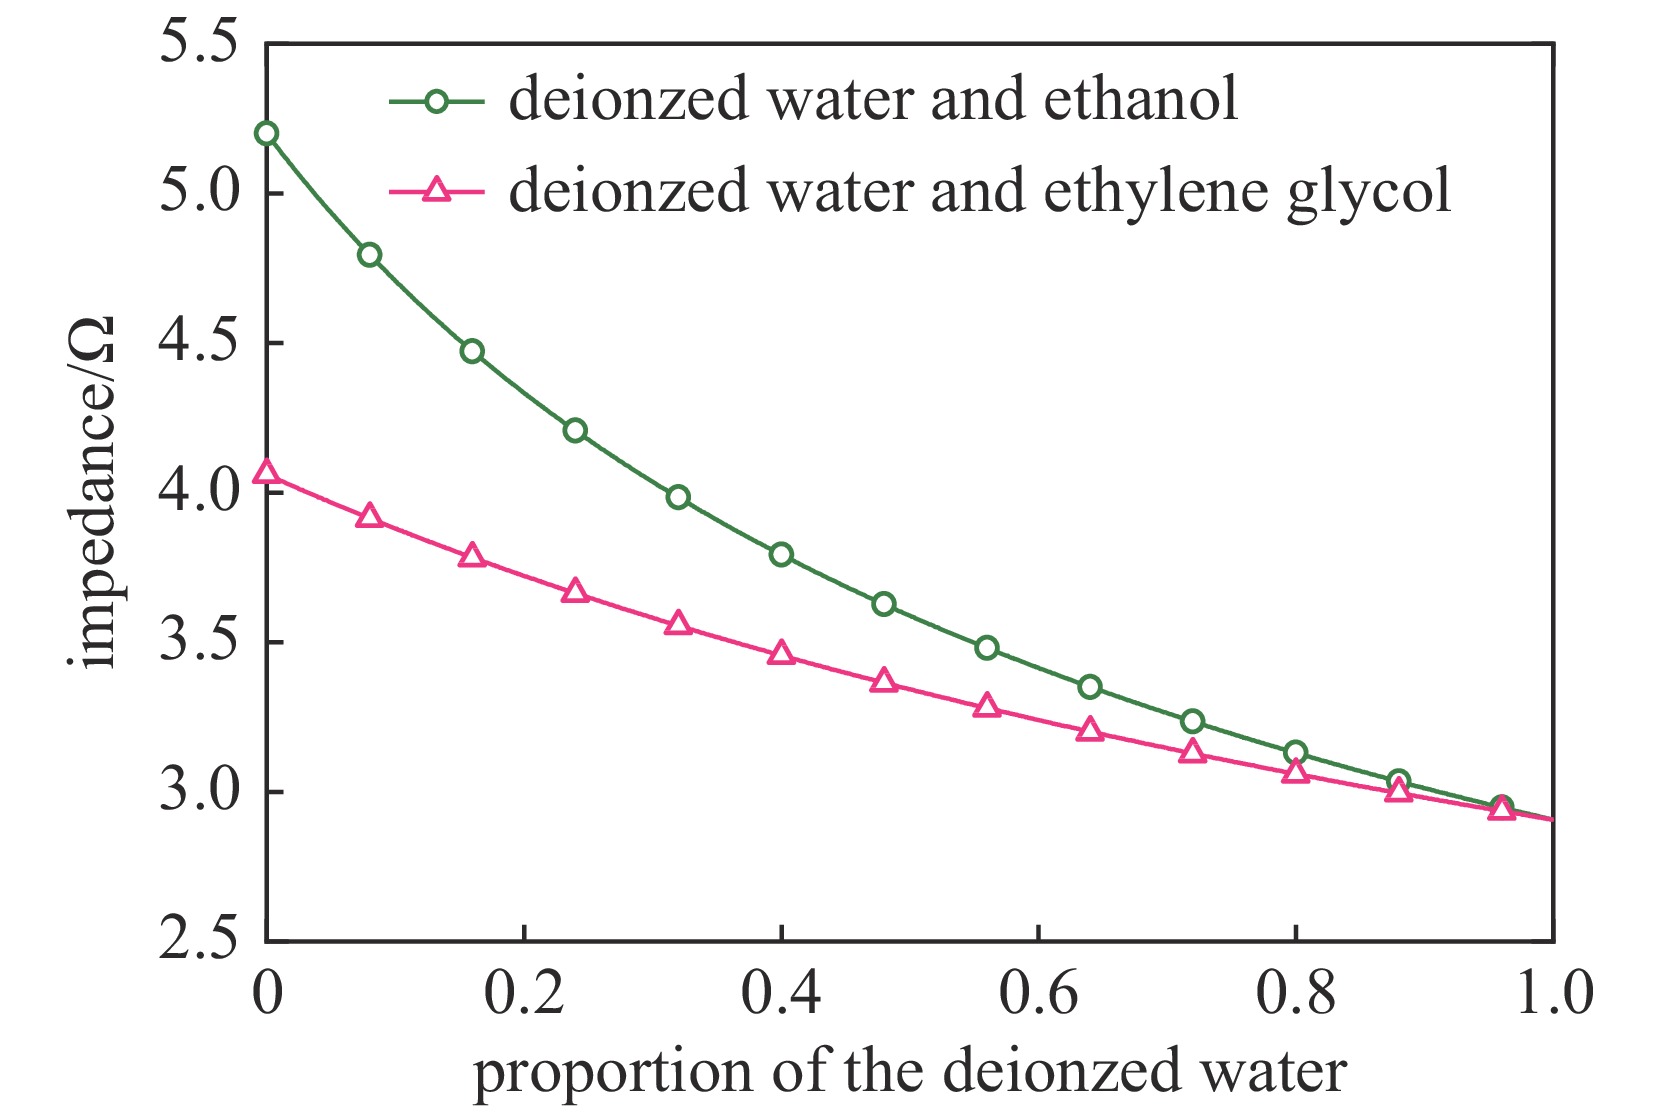 Characteristic impedance of the generator vs proportion of the deionized water